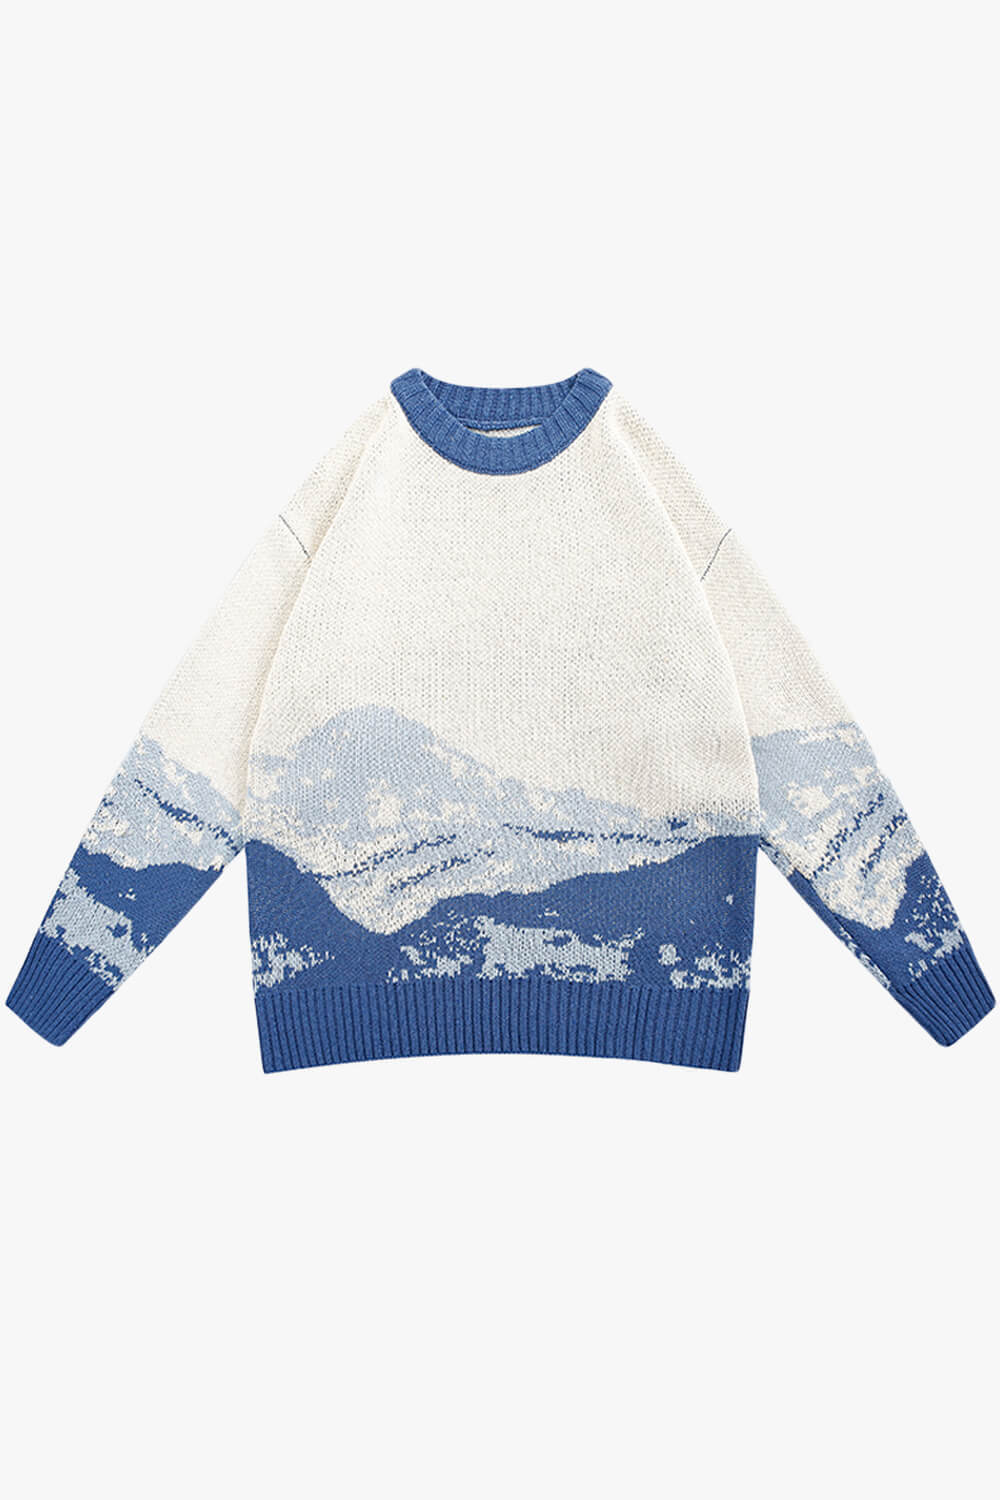 Snowy Mountains Round Neck Winter Aesthetic Sweater